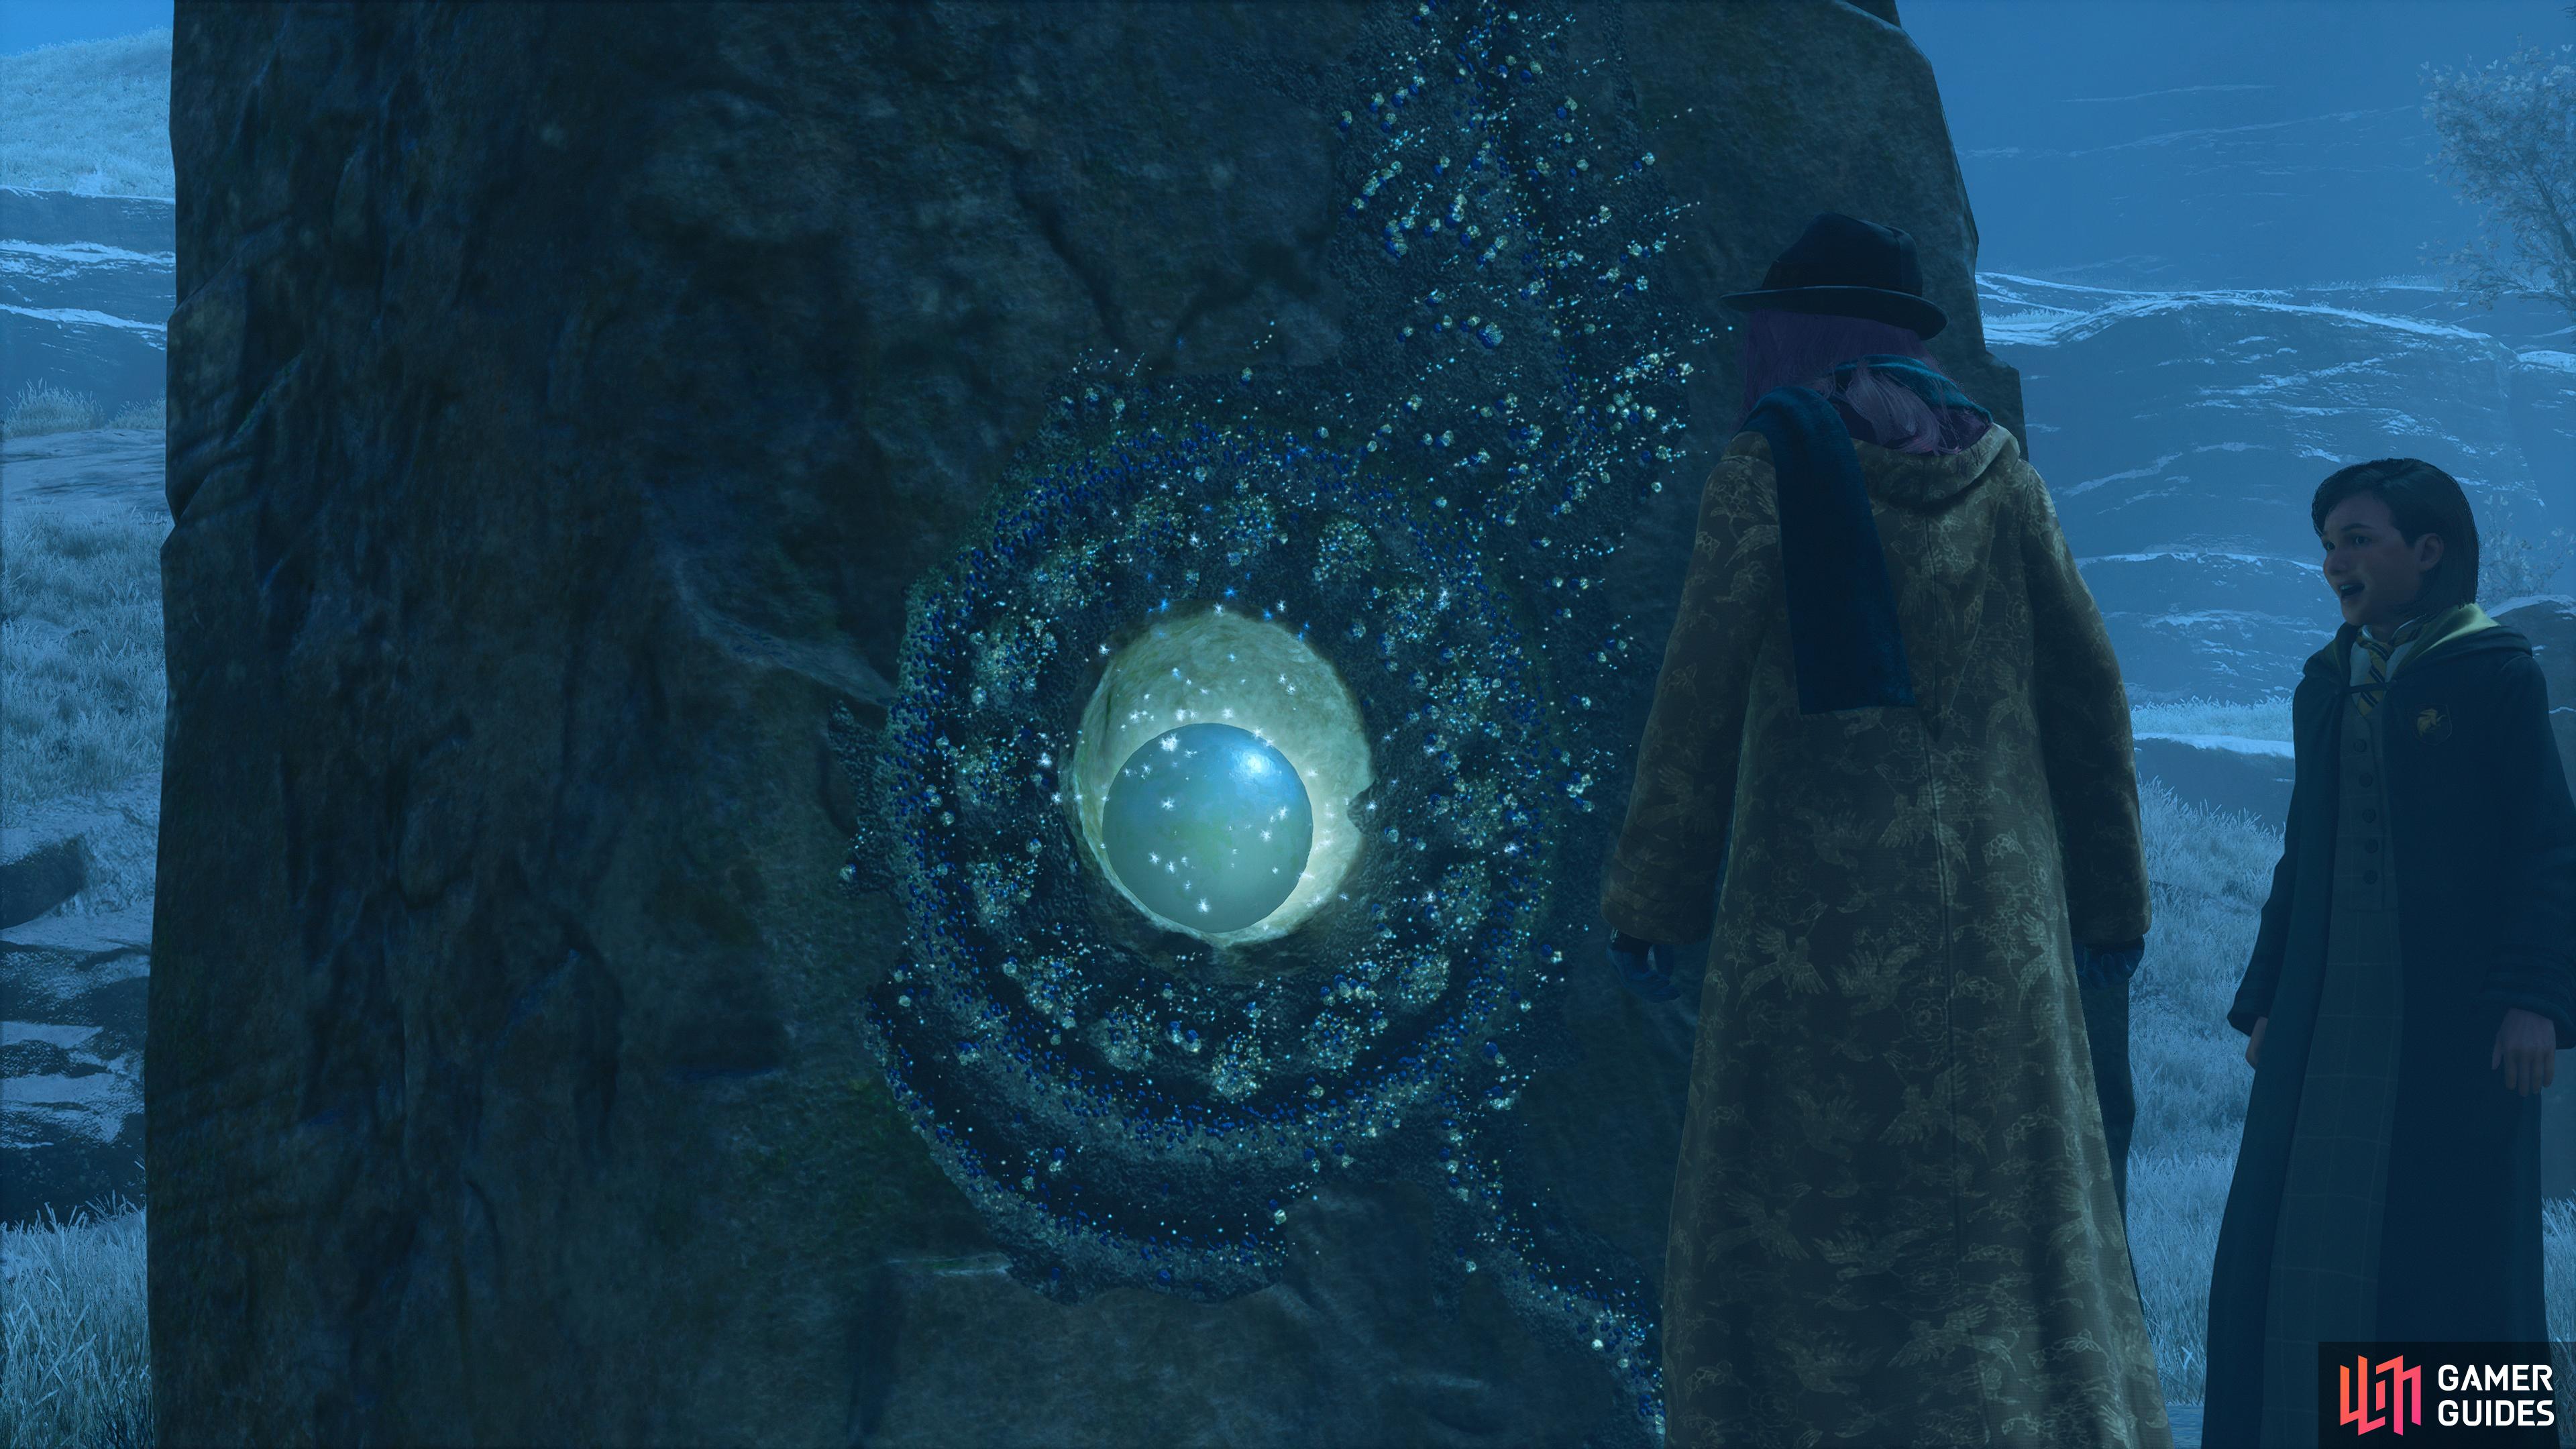 The moonstone being used in Hogwarts Legacy.